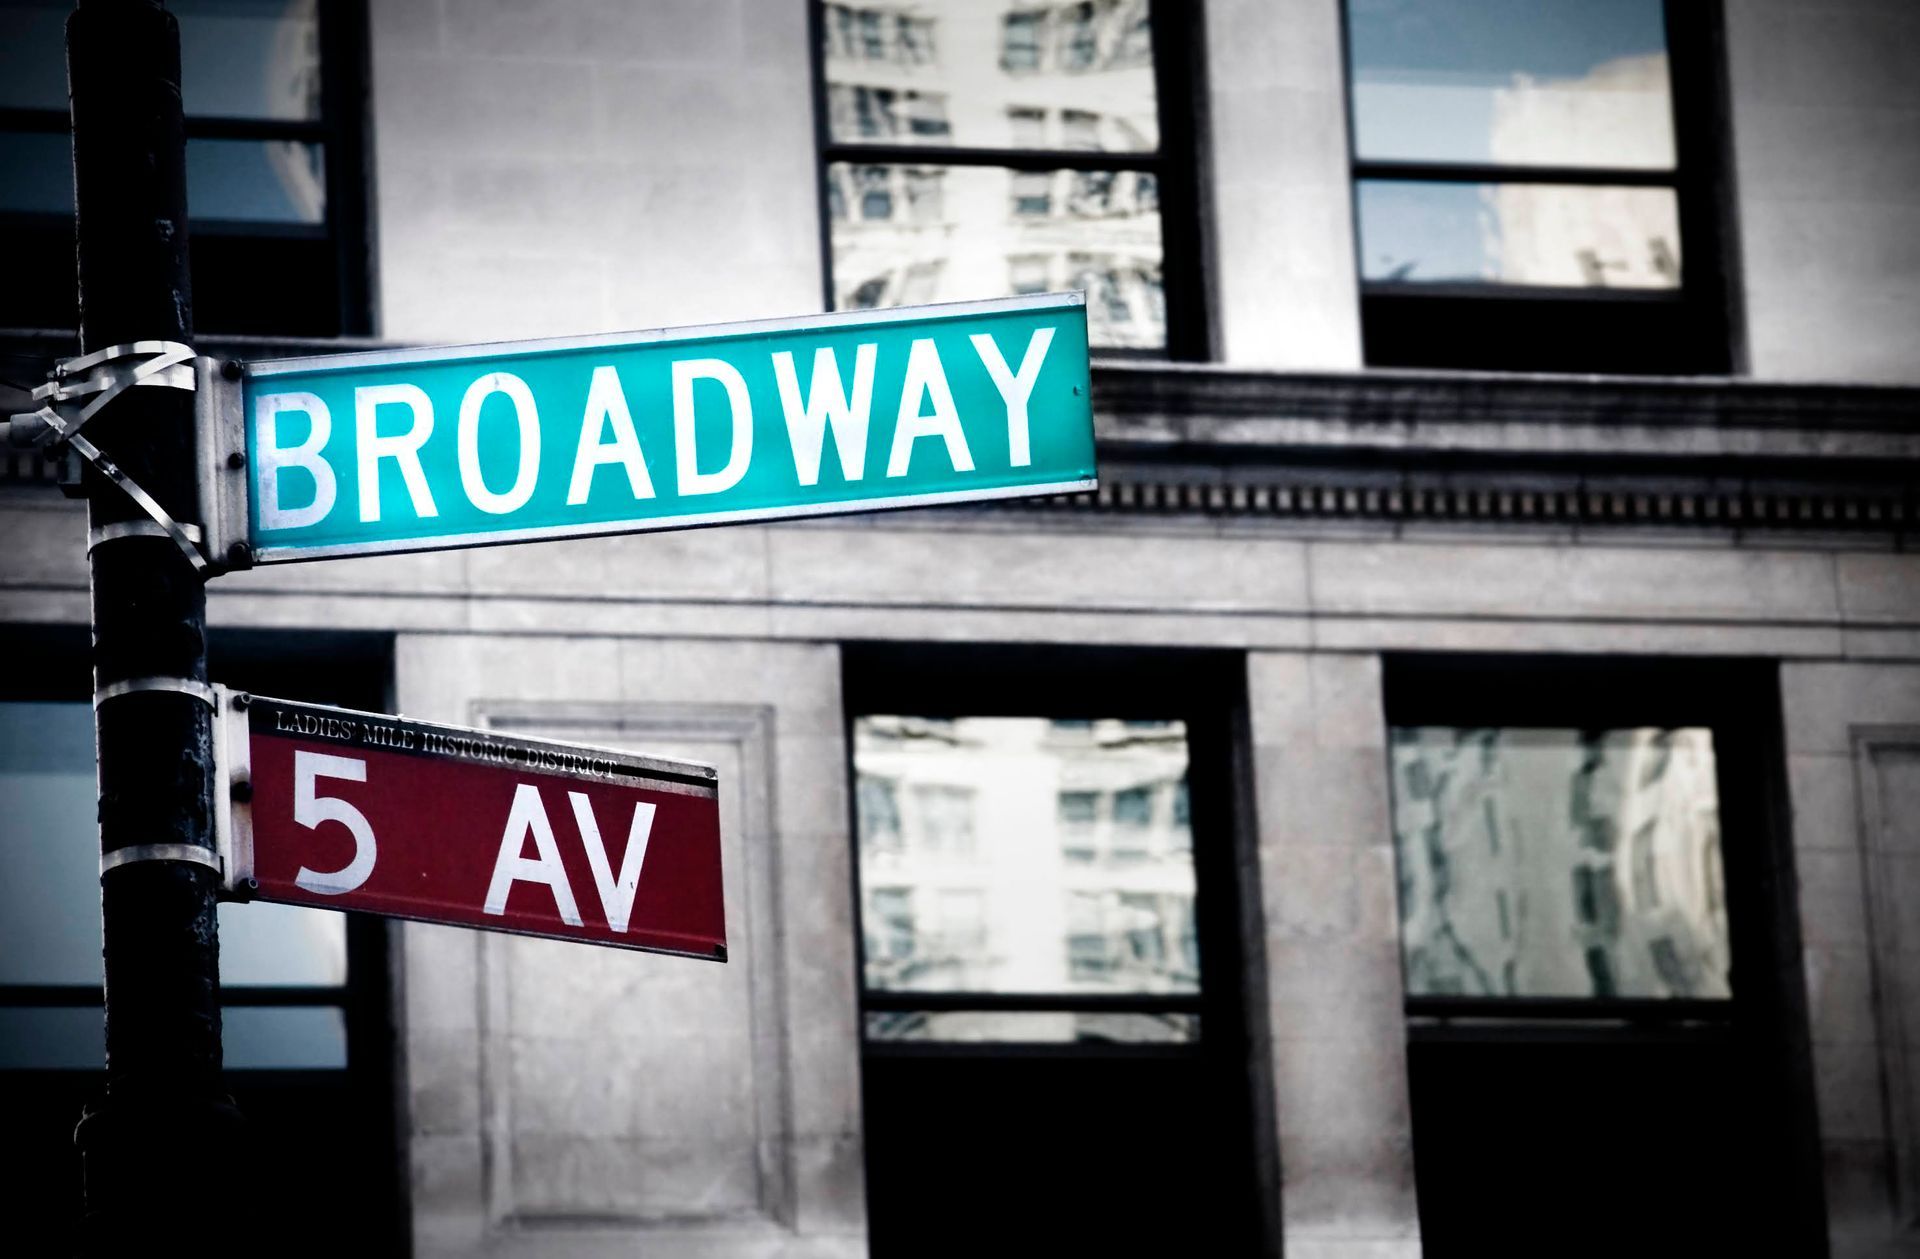 An image of a street in New York featuring a signpost indicating two different directions: Broadway and 5 AV.